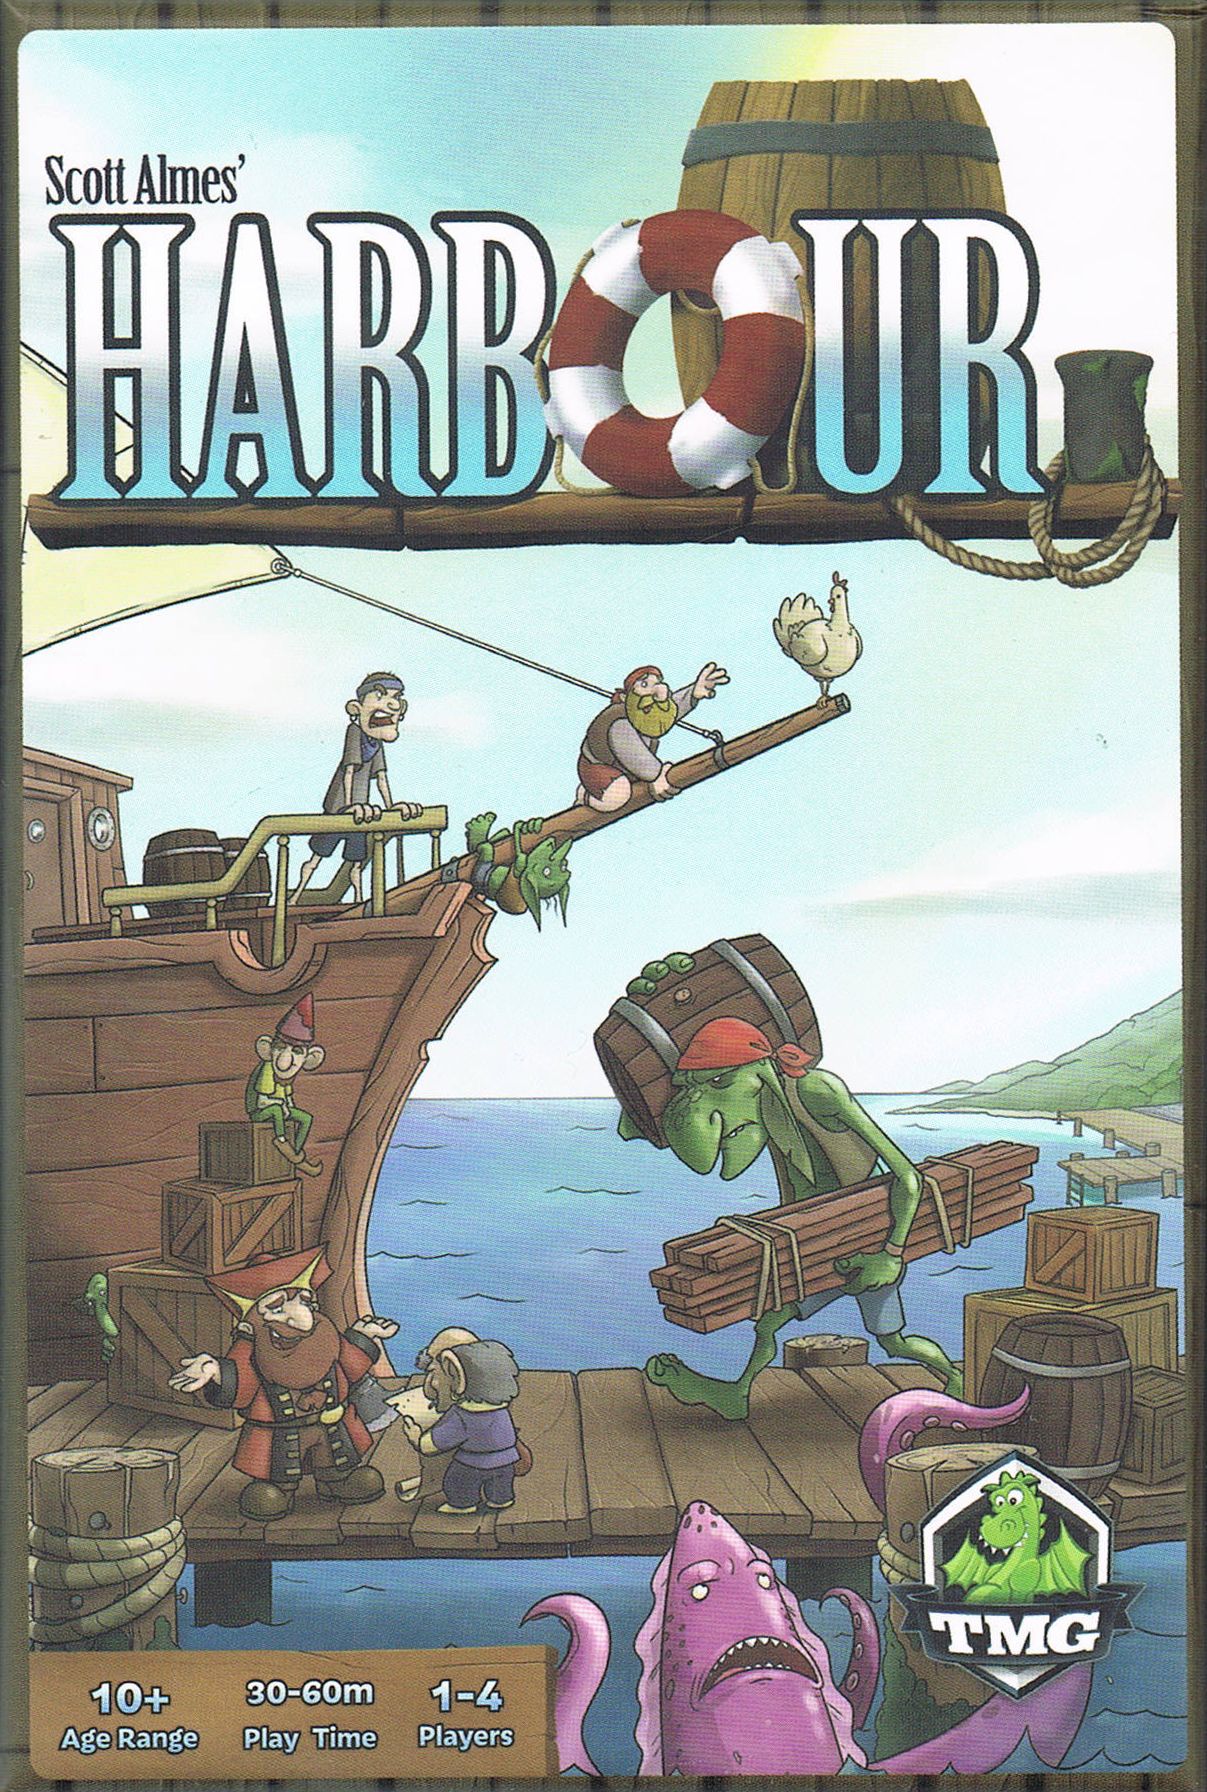 Read more about the article Harbour